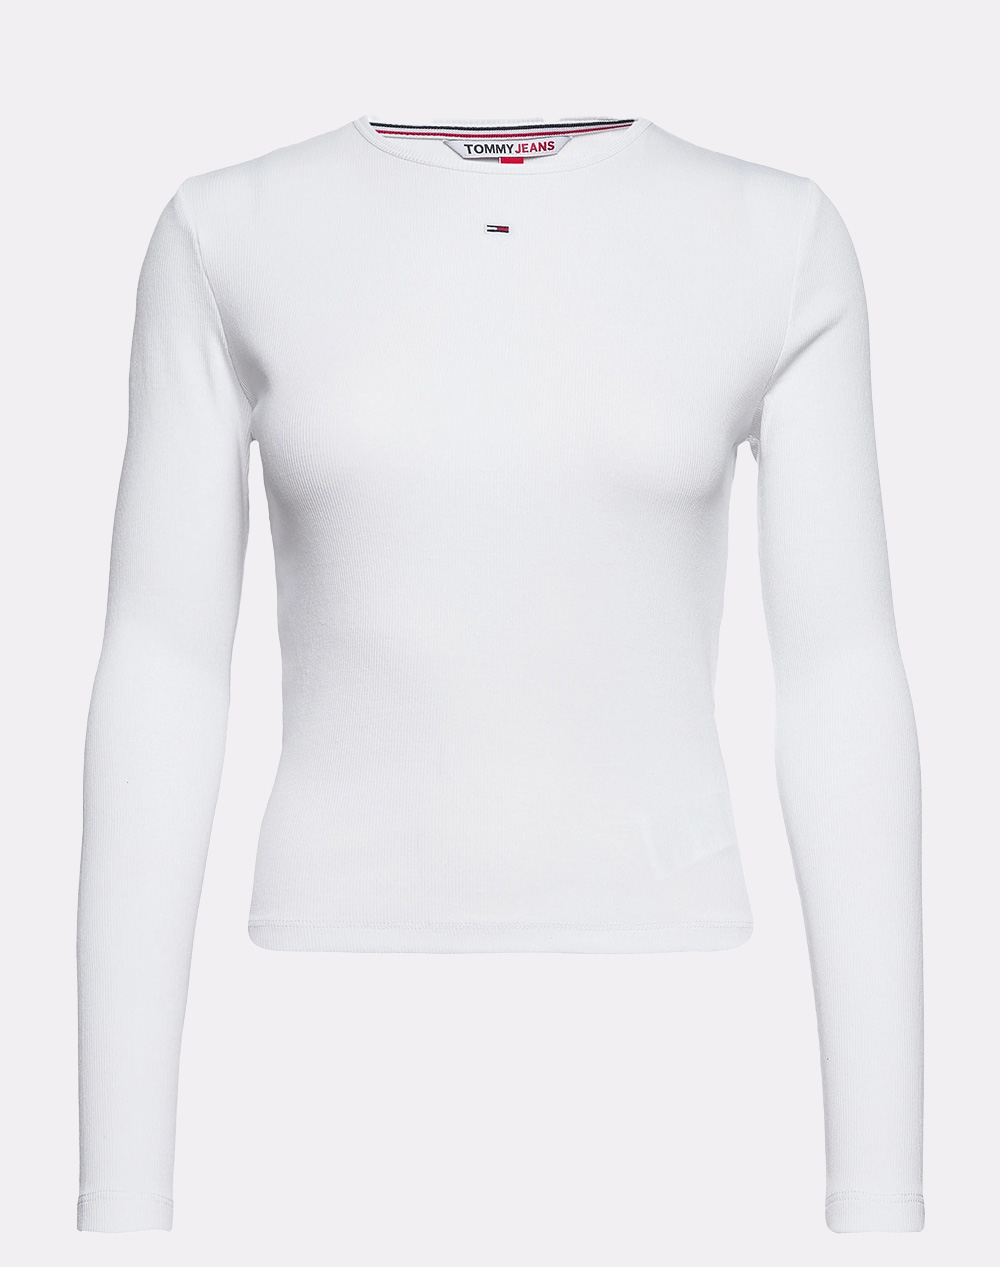 LONG-SLEEVED C-NECK BABY TOMMY JEANS RIB JERSEY TJW - TEE White